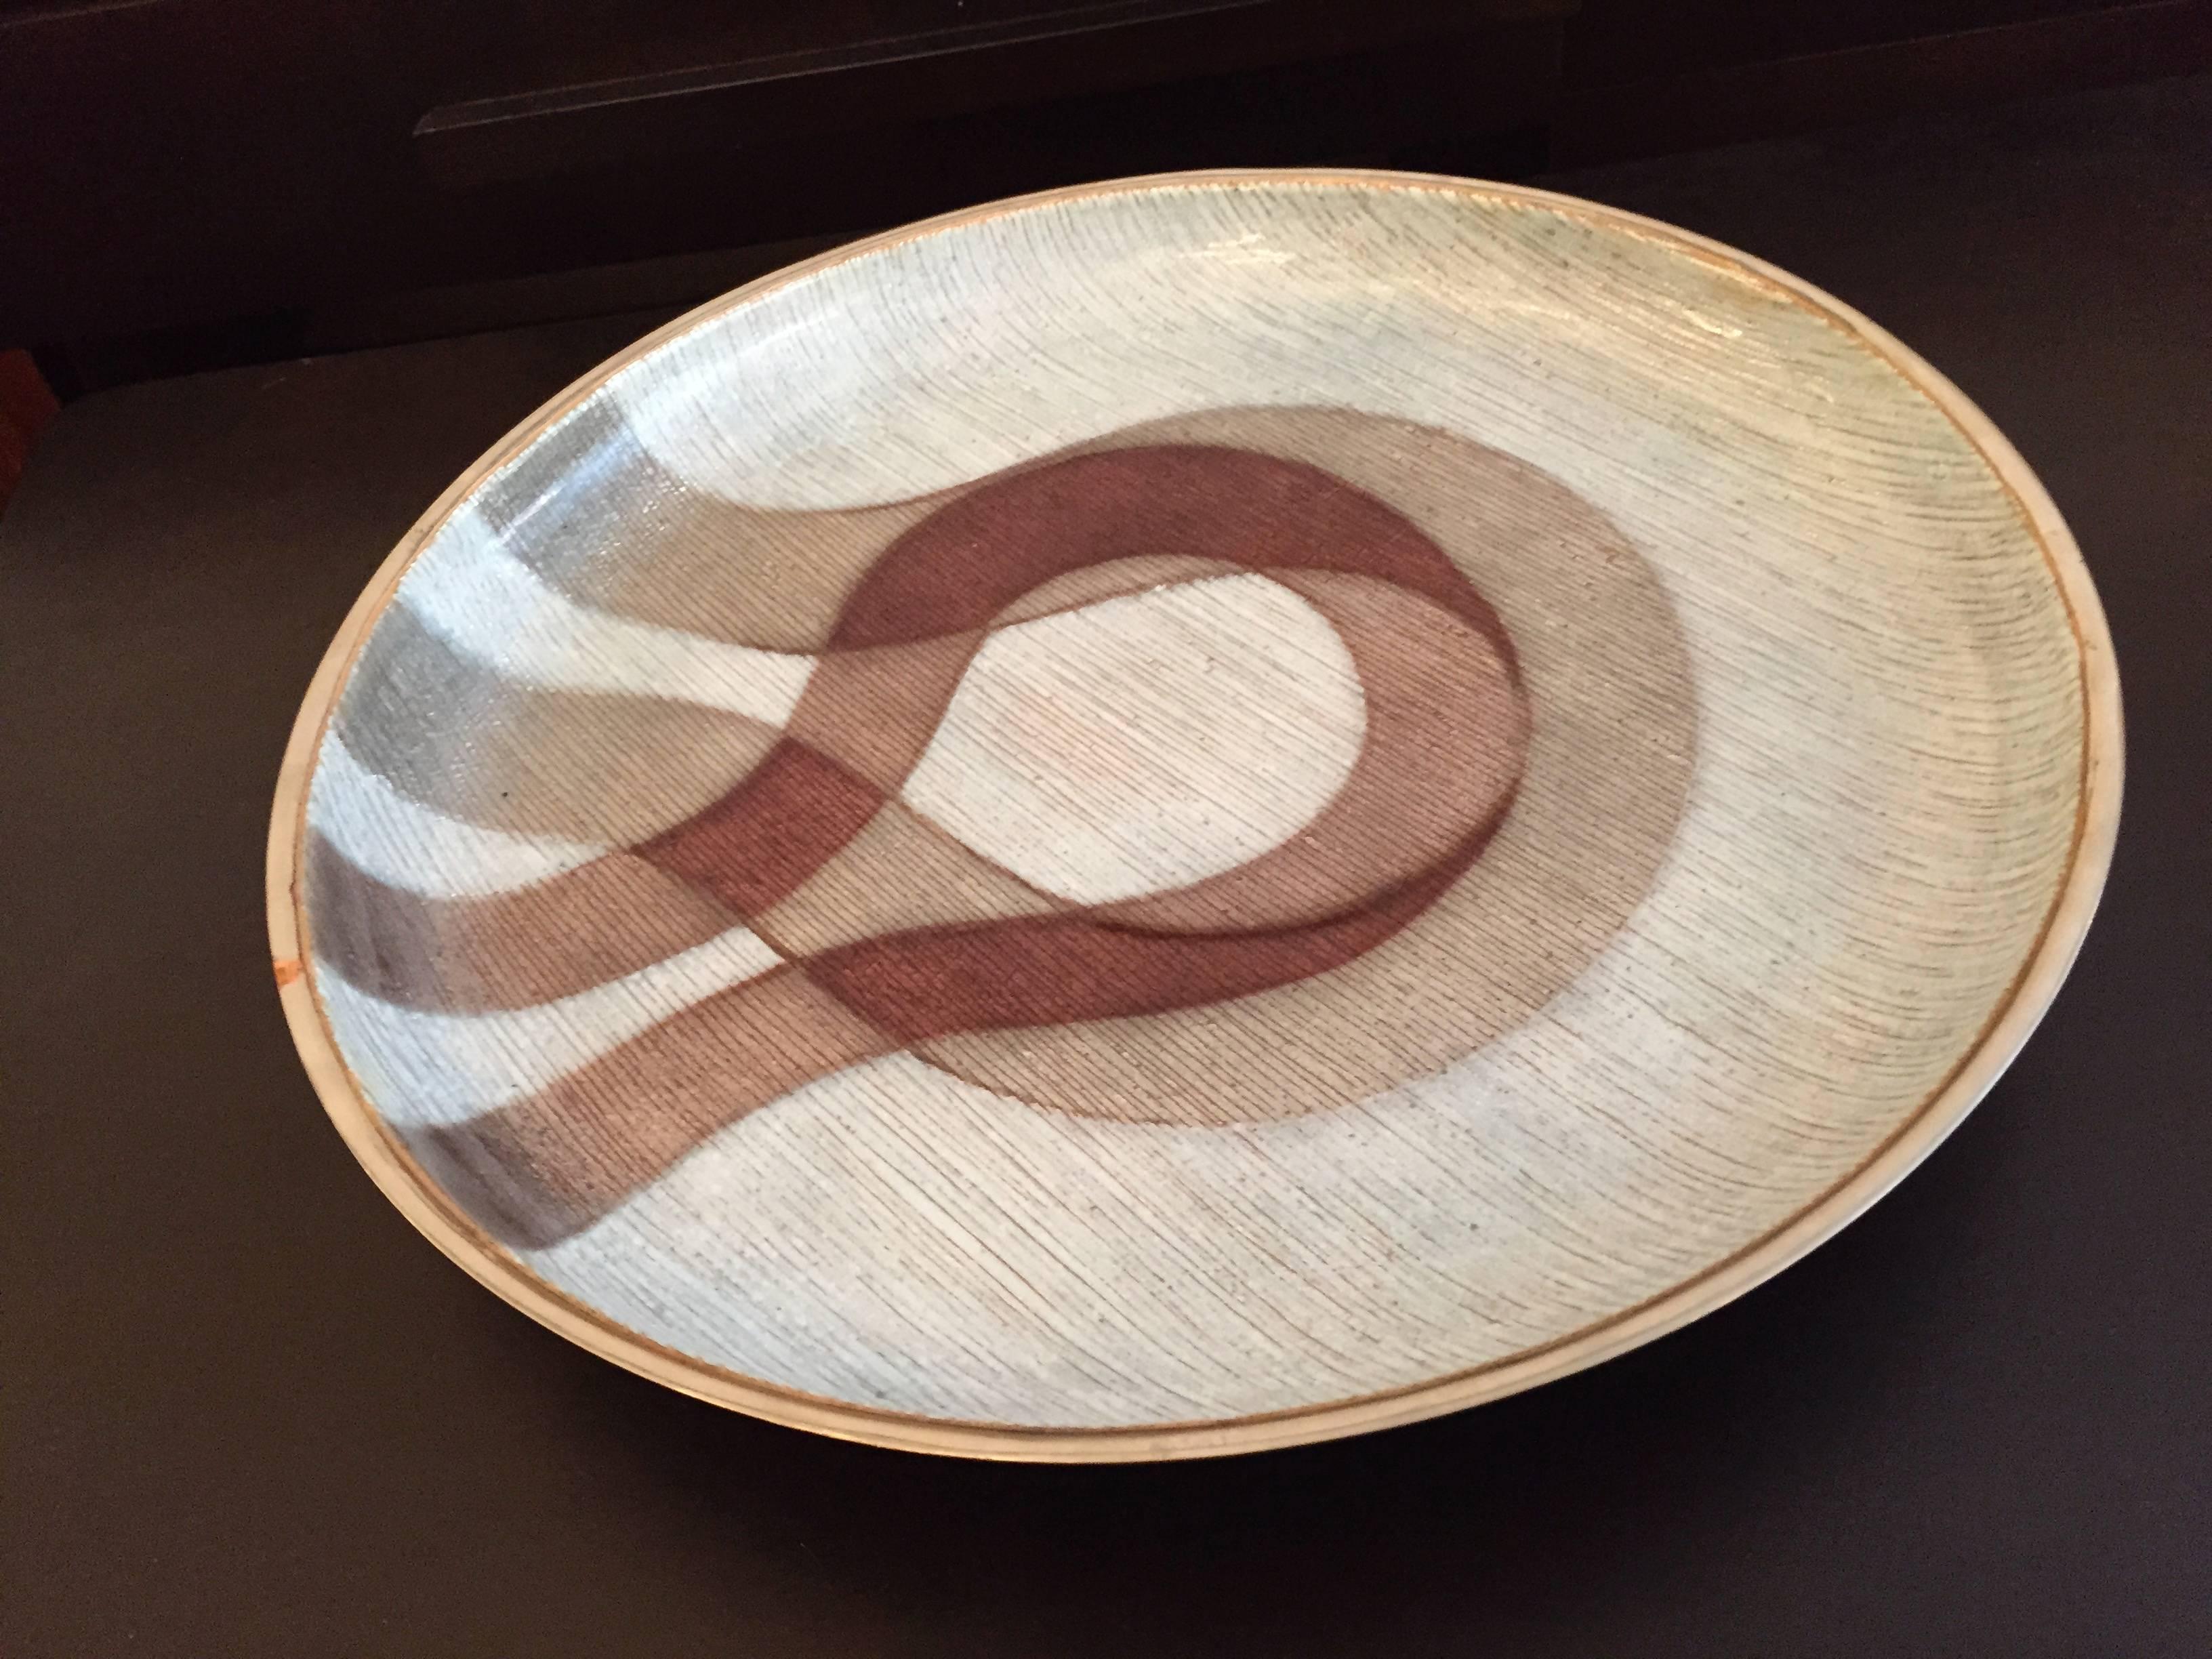 A rare very large center bowl/ tray with equisite detailed enamel work by the famed firm, Studio Del Campo. Signed. Del Campo is noted with work for Gio Ponti and Ettore Sottsass. Many other Del Campo pieces available.

Studio Del Campo in Turin